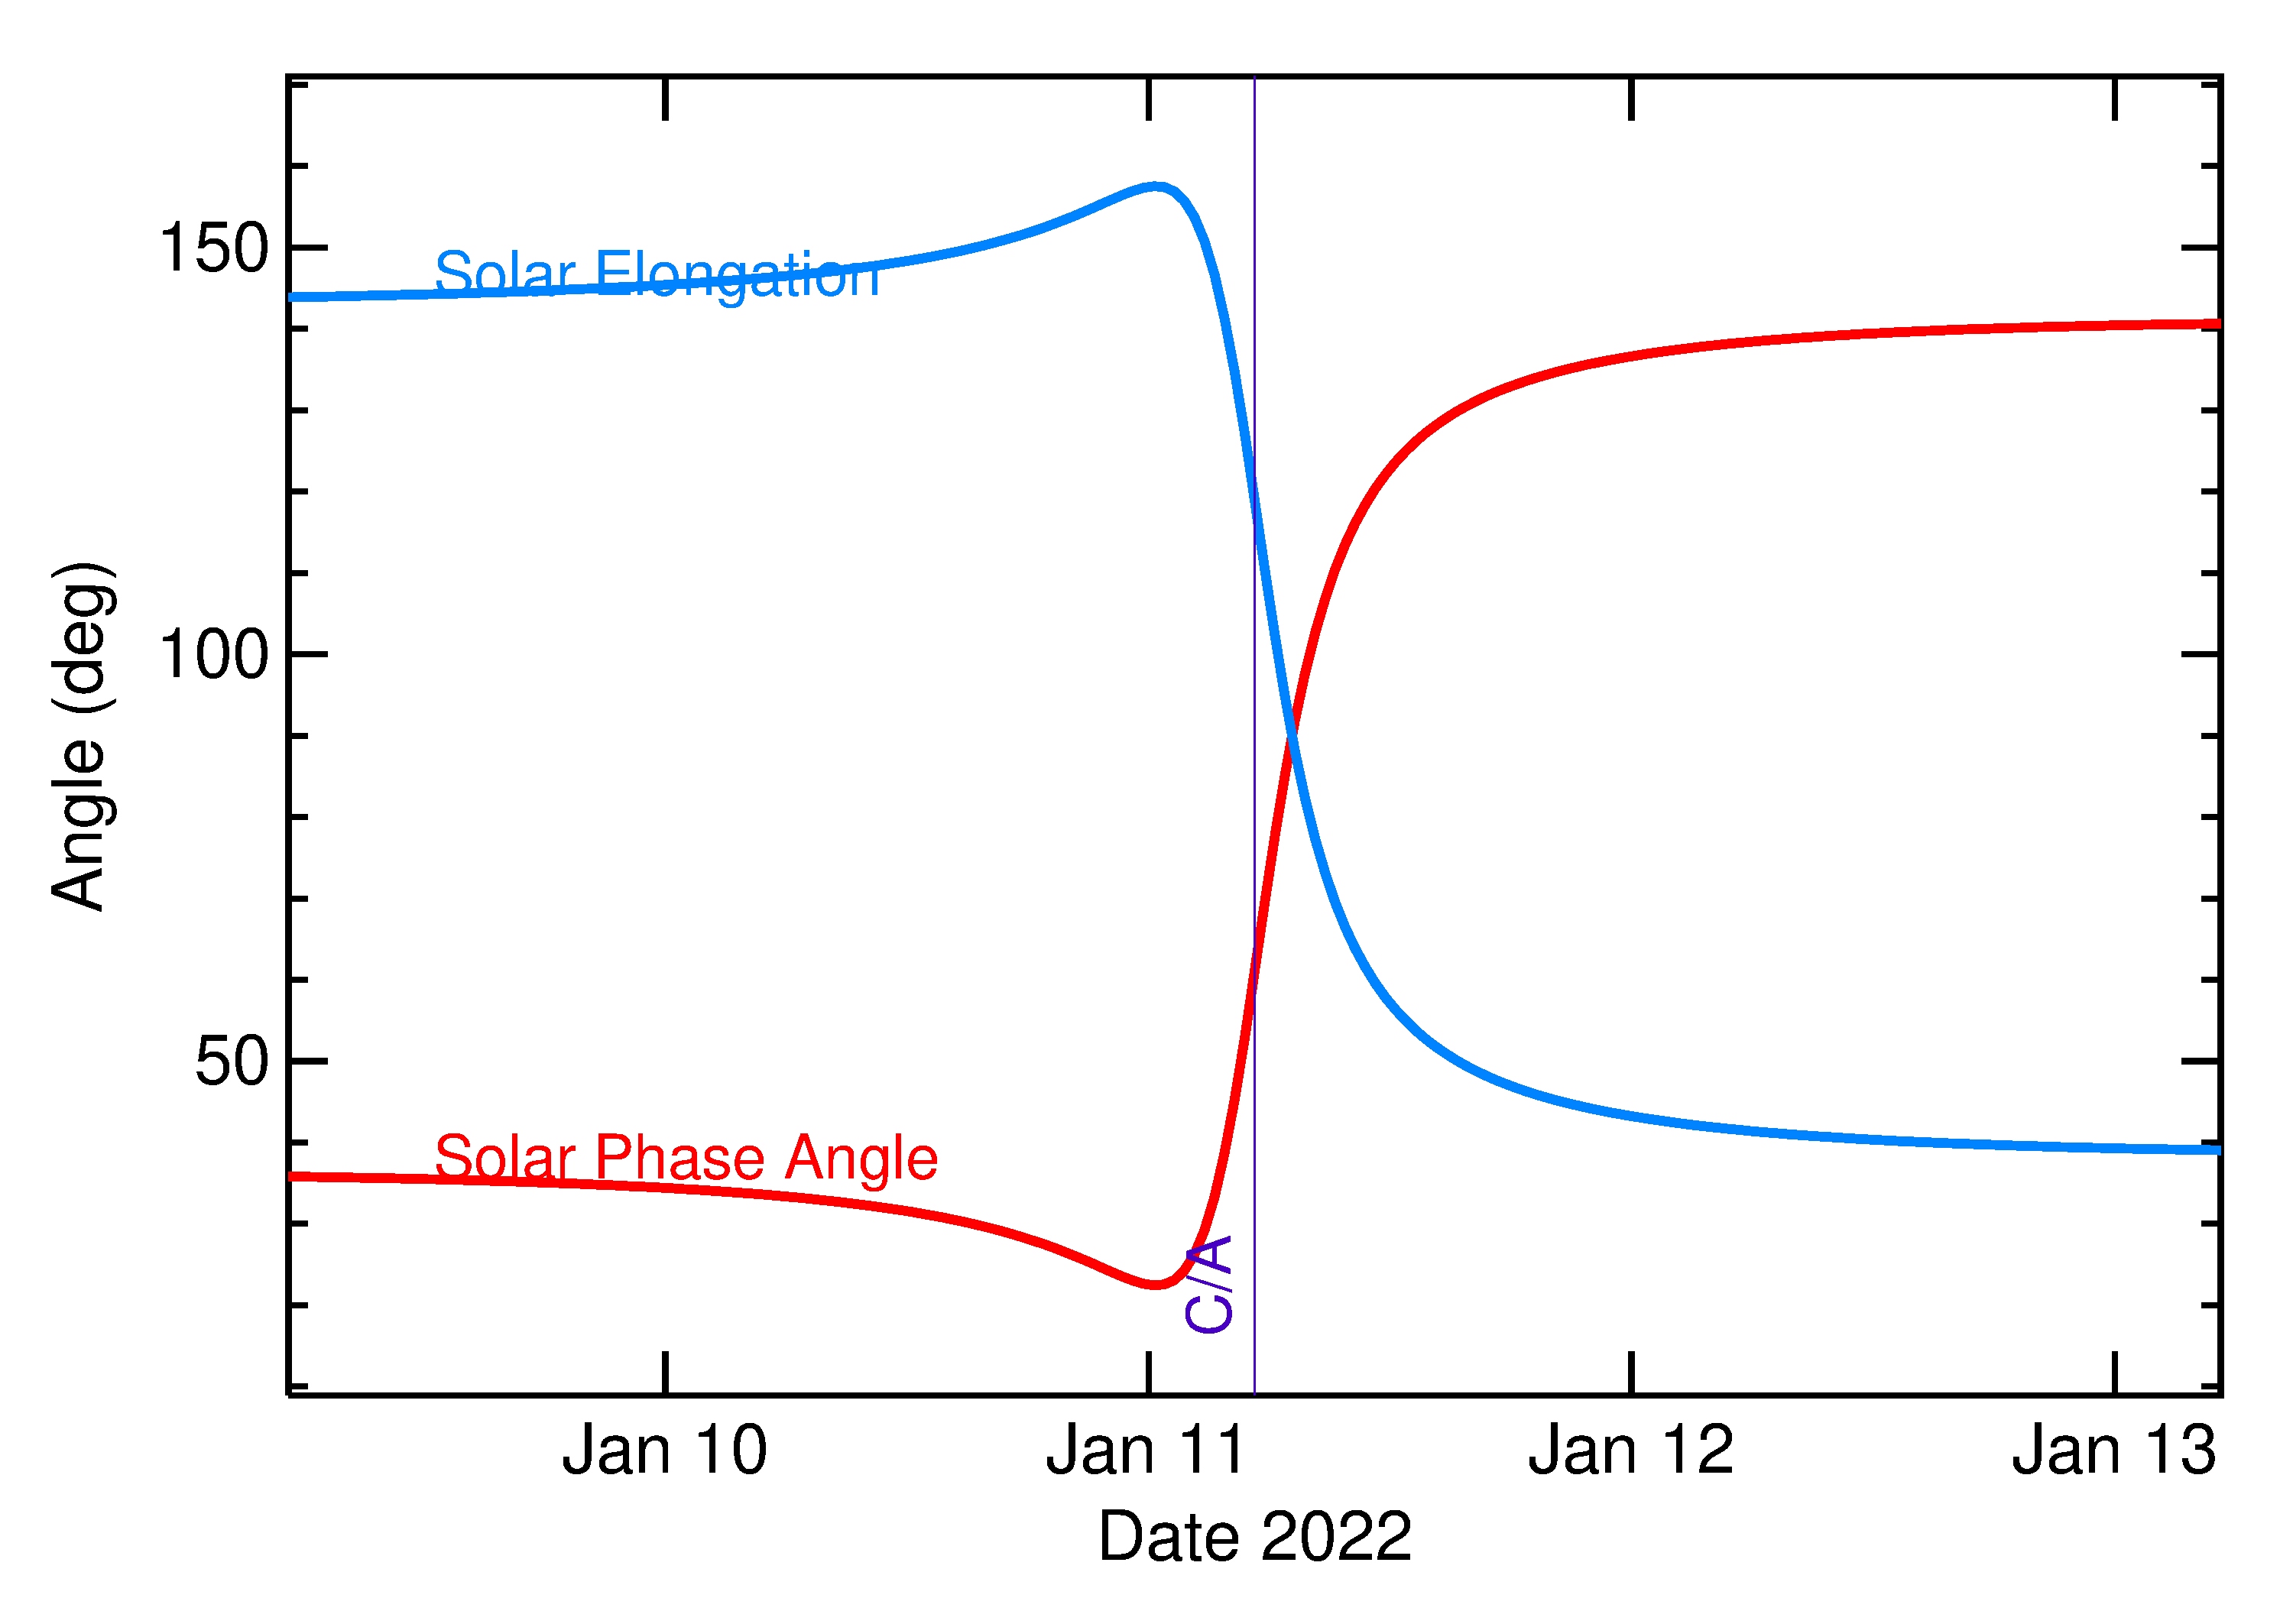 Solar Elongation and Solar Phase Angle of 2022 AC4 in the days around closest approach